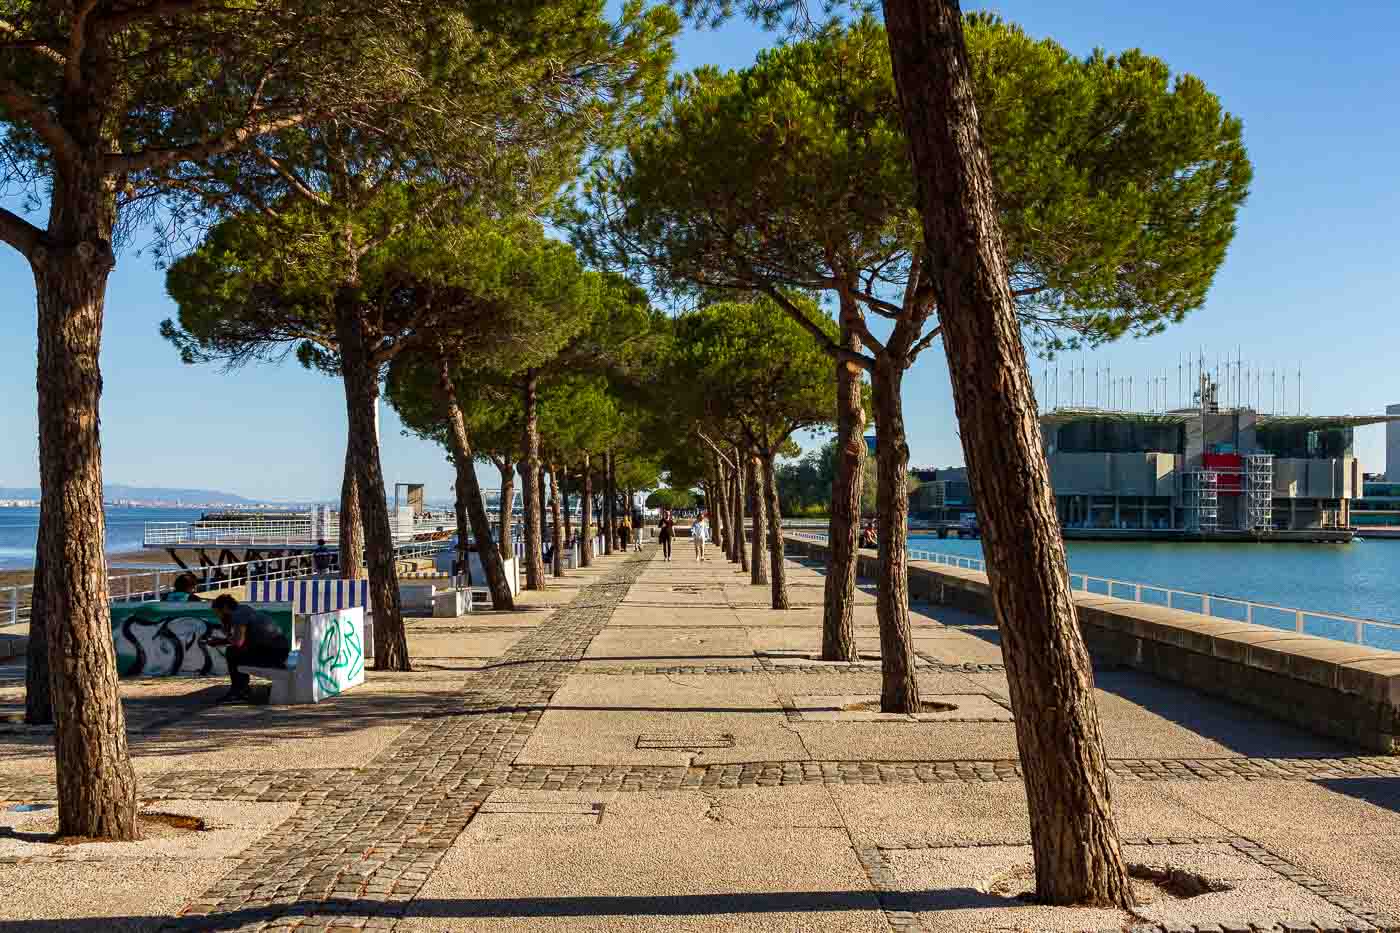 Are you seeking a peaceful moment after walking around in this bustling district? Take a stroll through Parque do Tejo, a waterfront park beloved by locals. Here, you can escape the tourist crowds and watch residents jog, cycle, or walk their dogs along the boardwalk. 